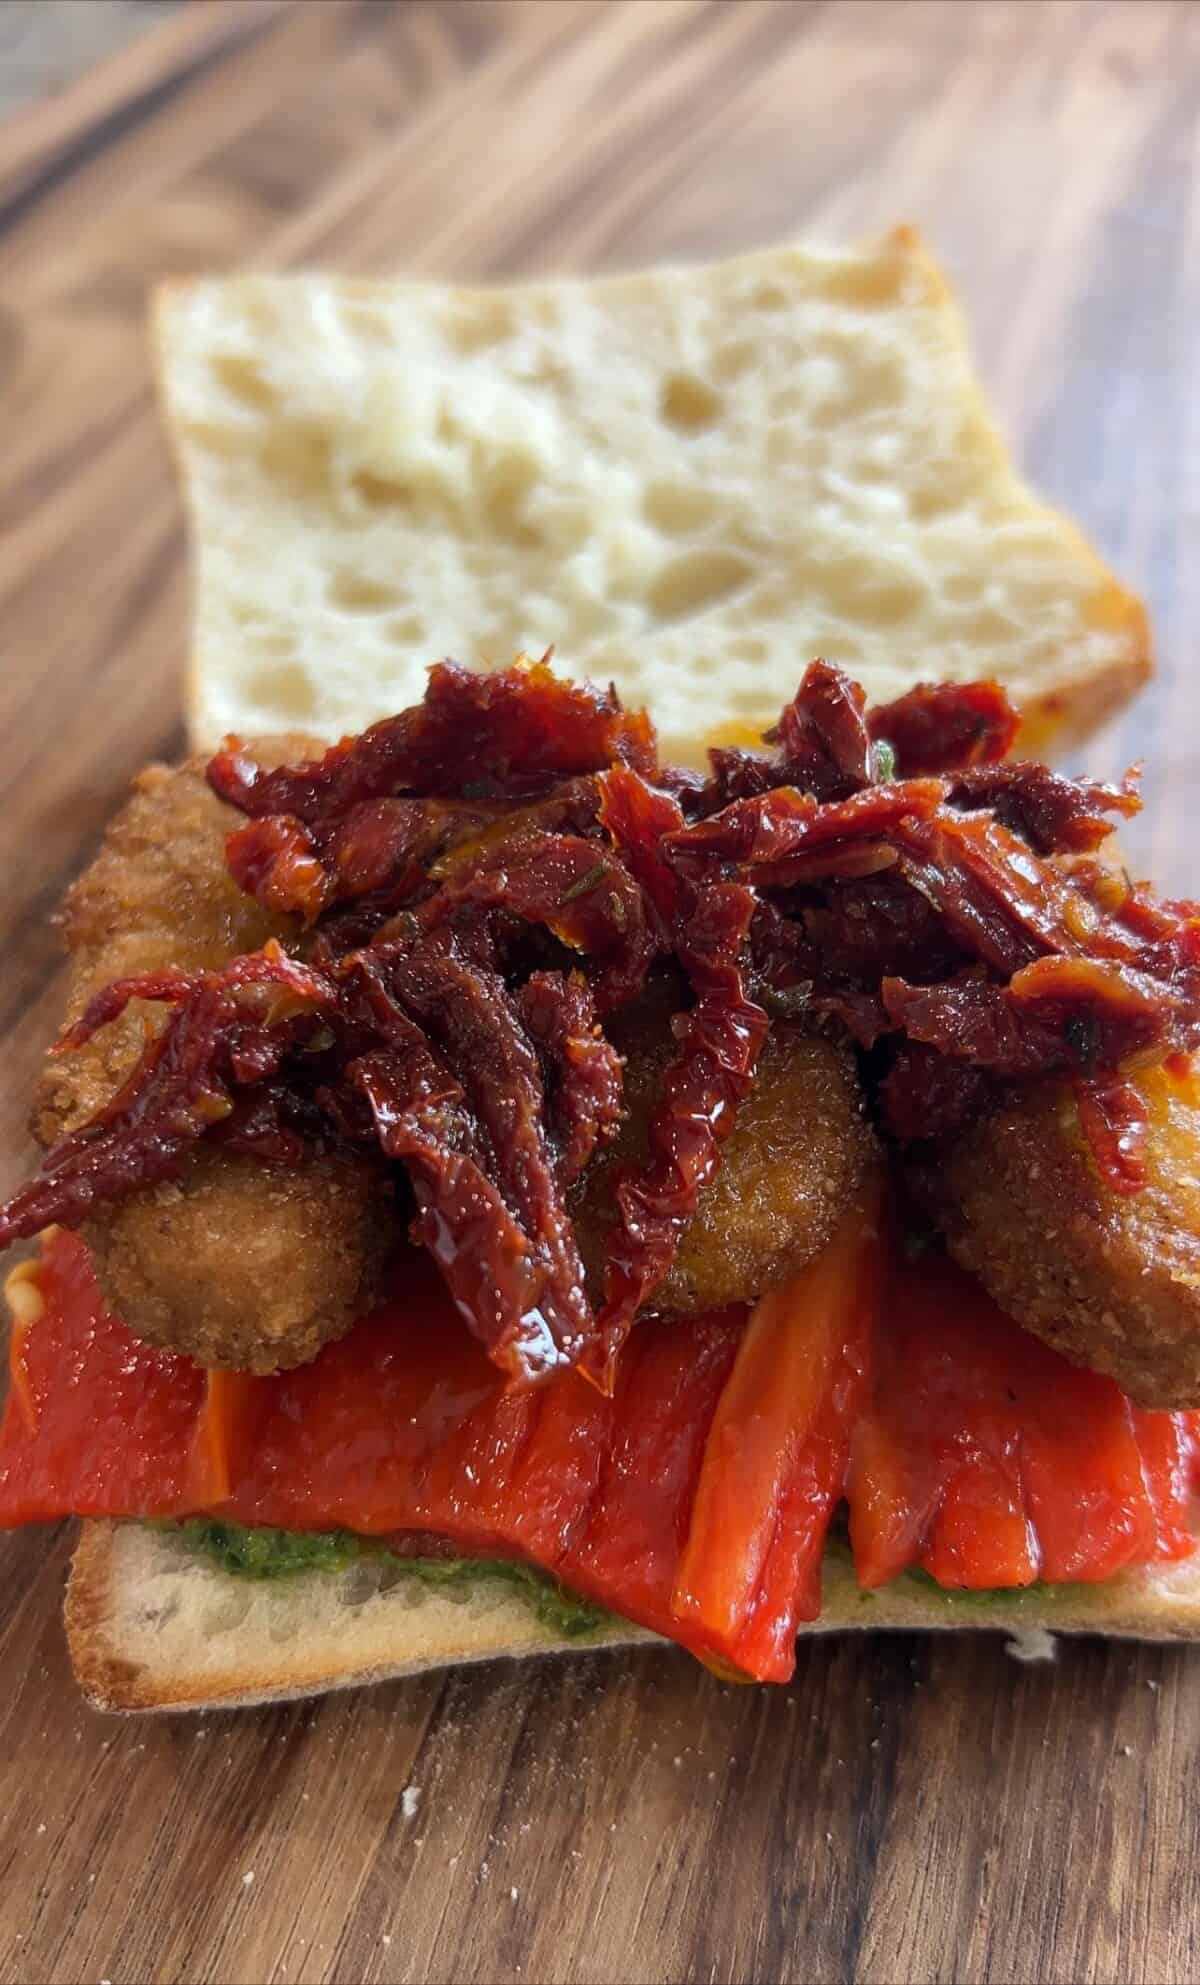 sun-dried tomatoes added to the sandwich.